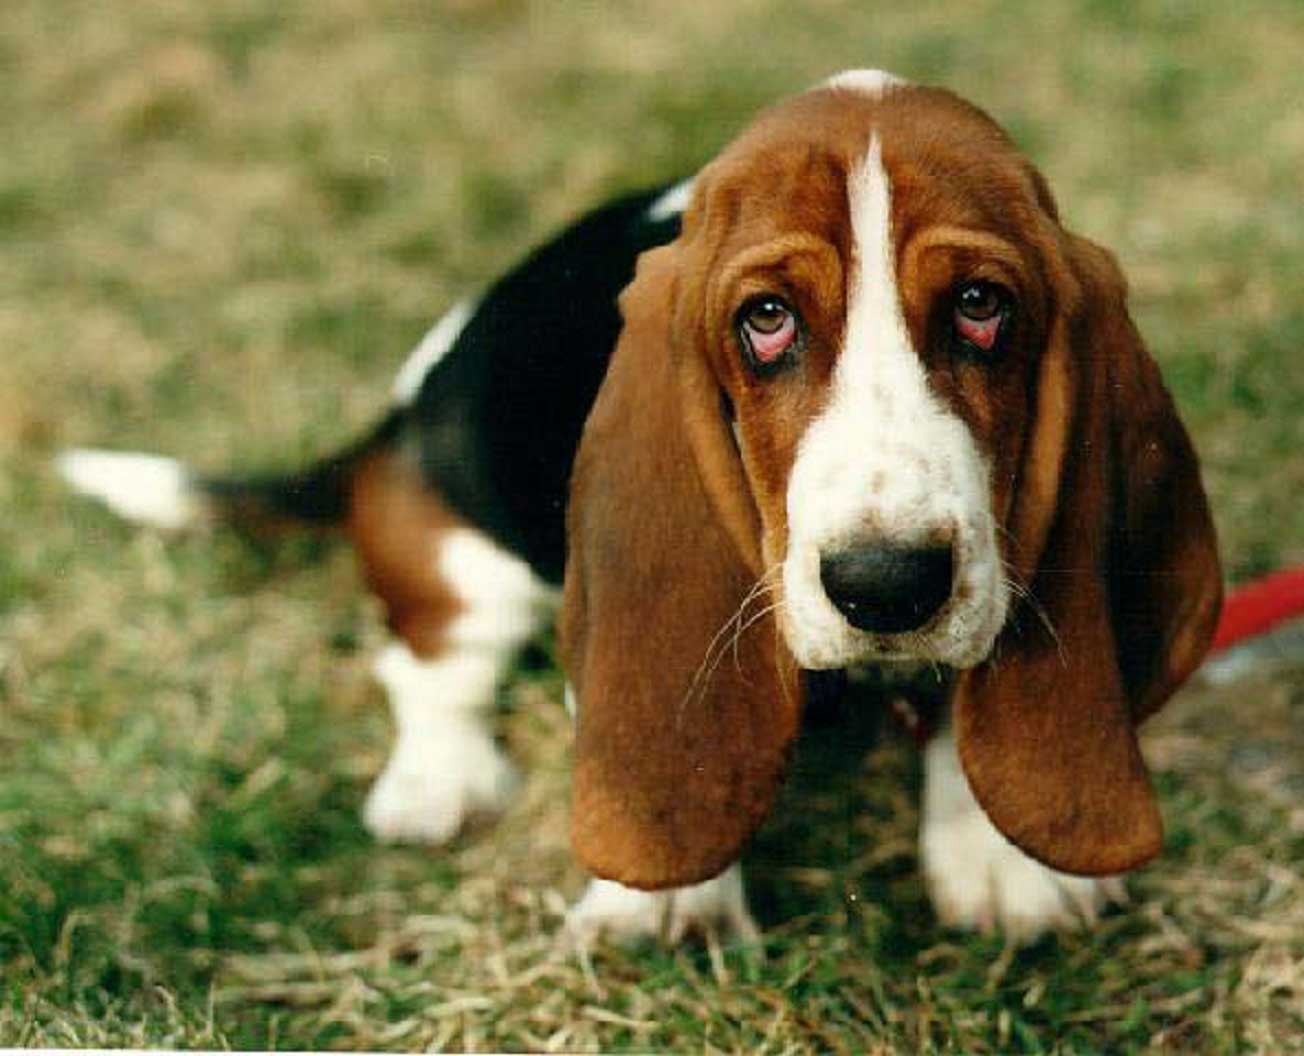 Basset Hound Backgrounds, Compatible - PC, Mobile, Gadgets| 1304x1056 px